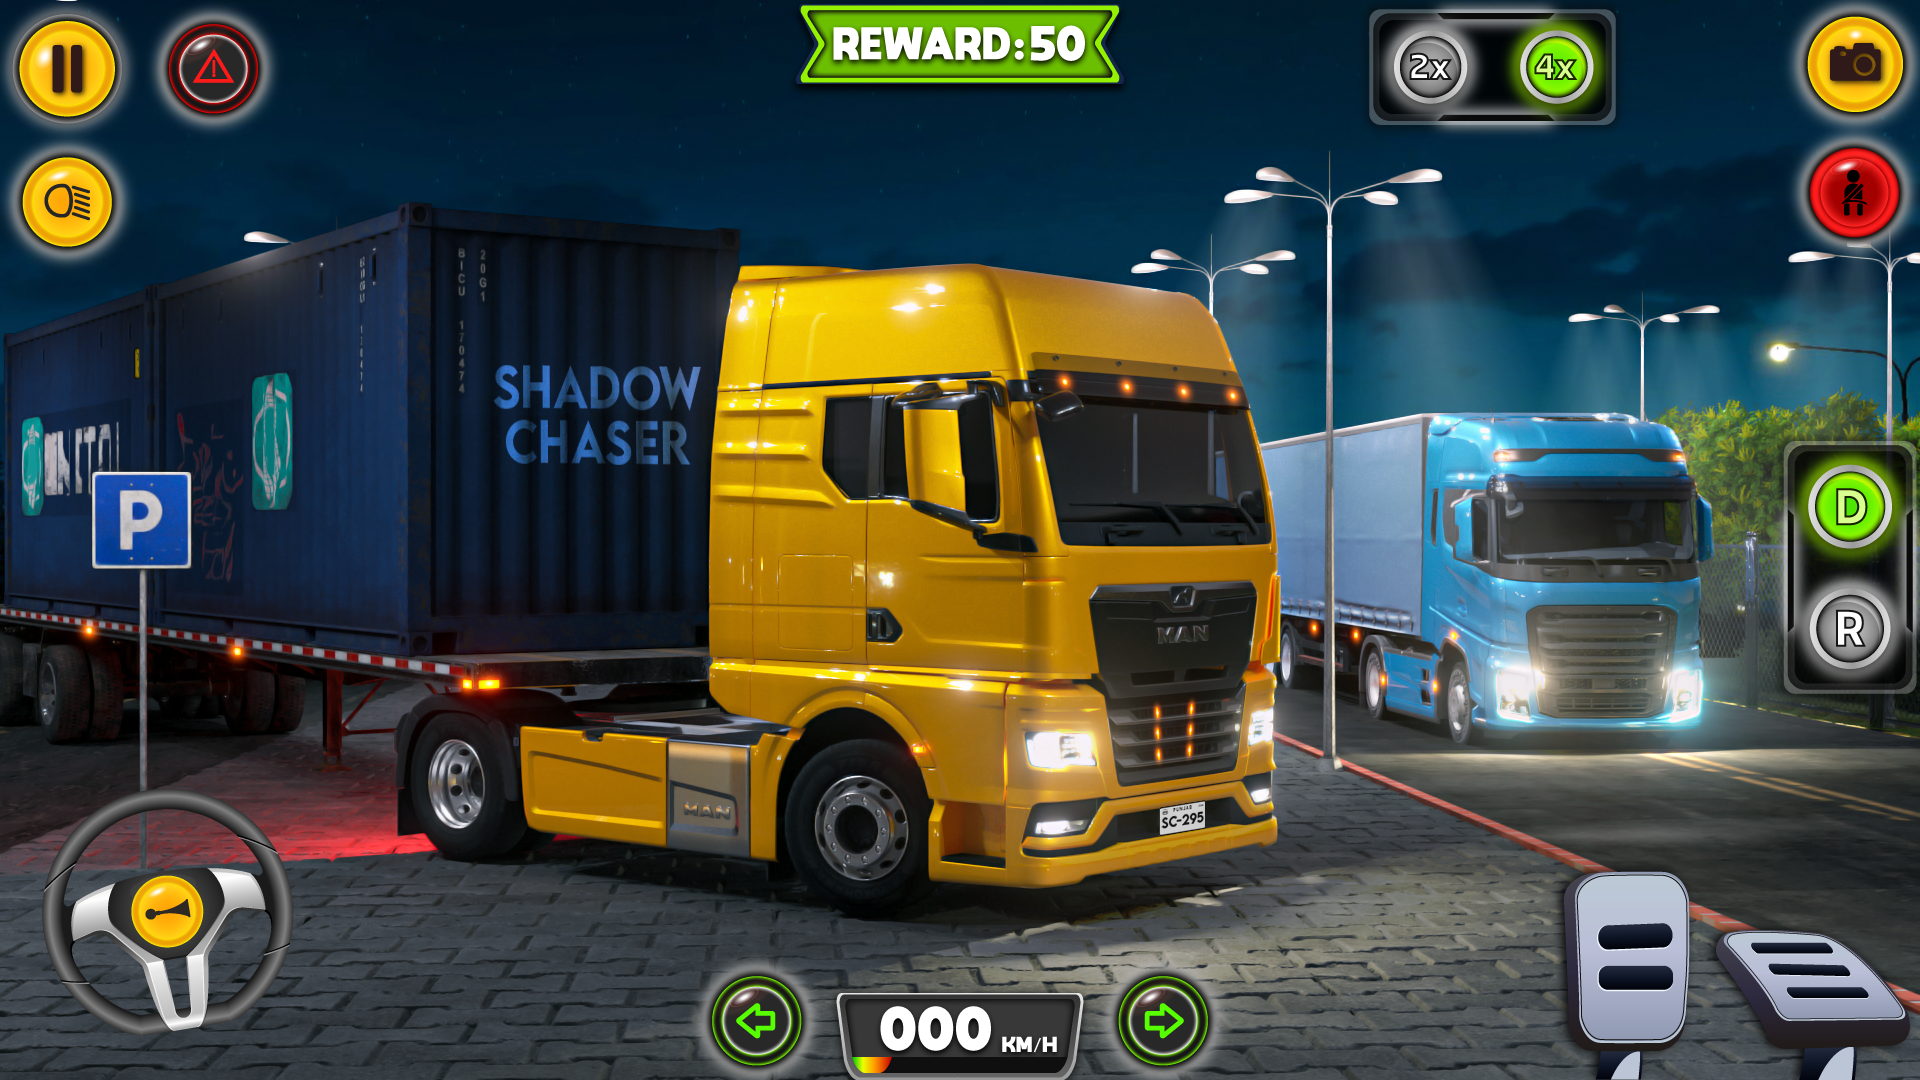 Euro Truck Simulator 2022 for Android - Download